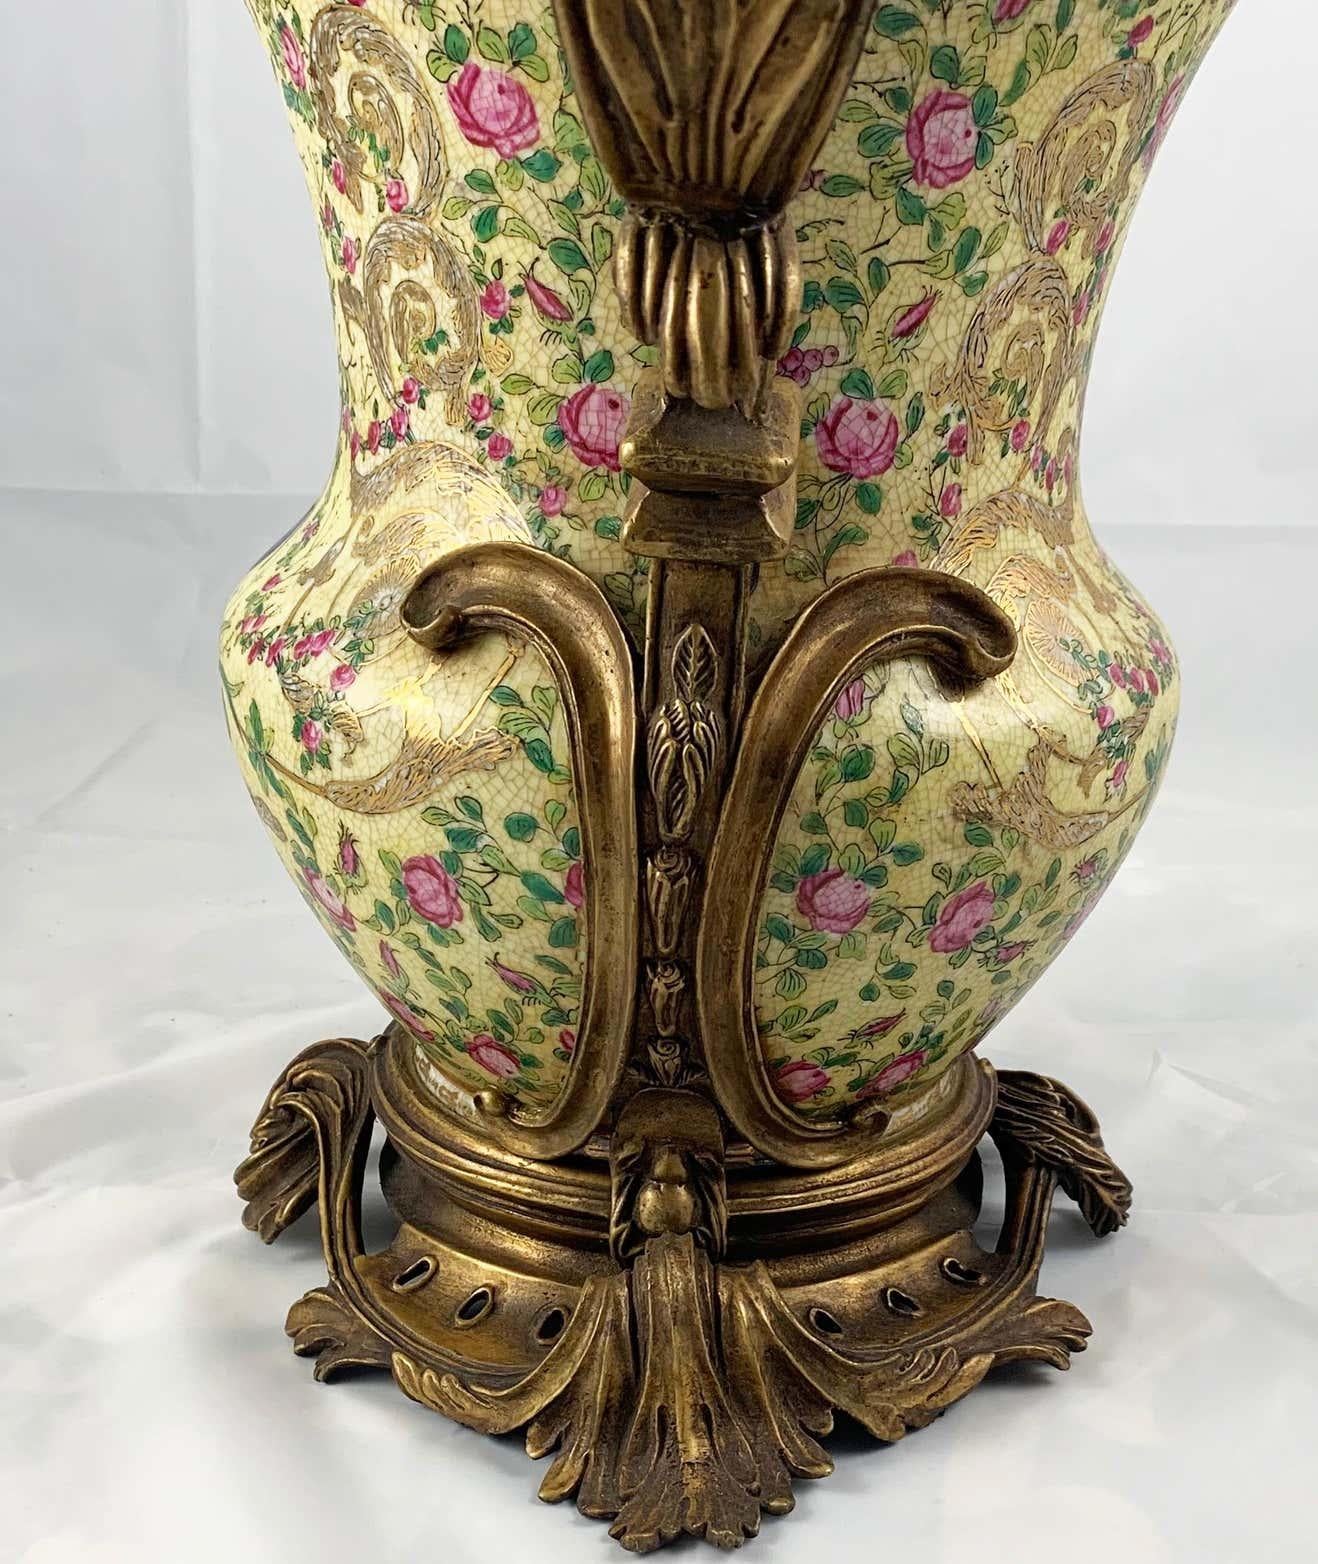 20th Century Pair of French Porcelain and Ormolu-Mounted Twin Handled Urns For Sale 6